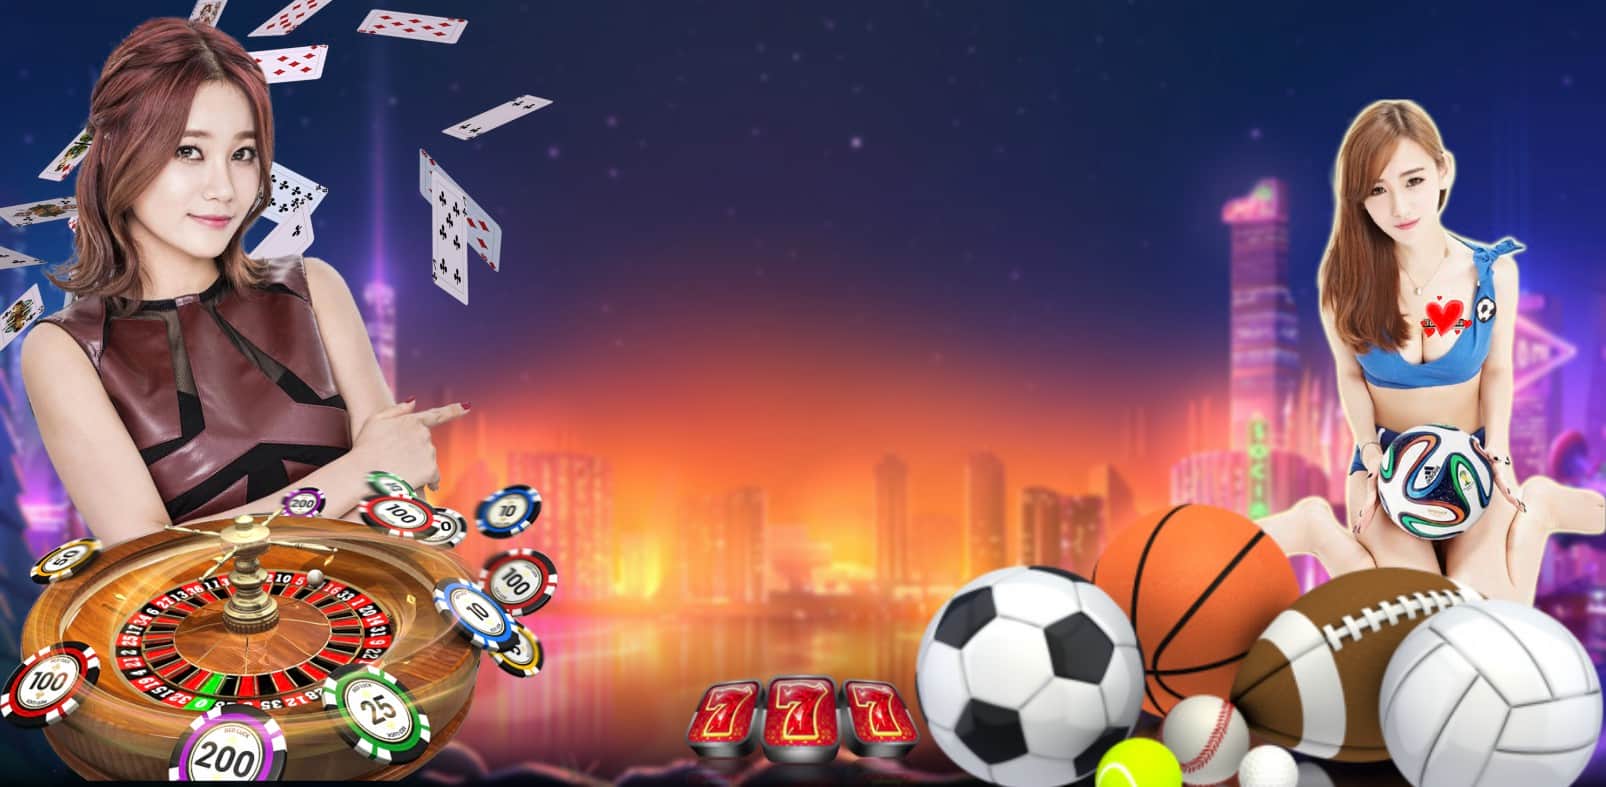 Best games are offered to the players in the real money casino sites